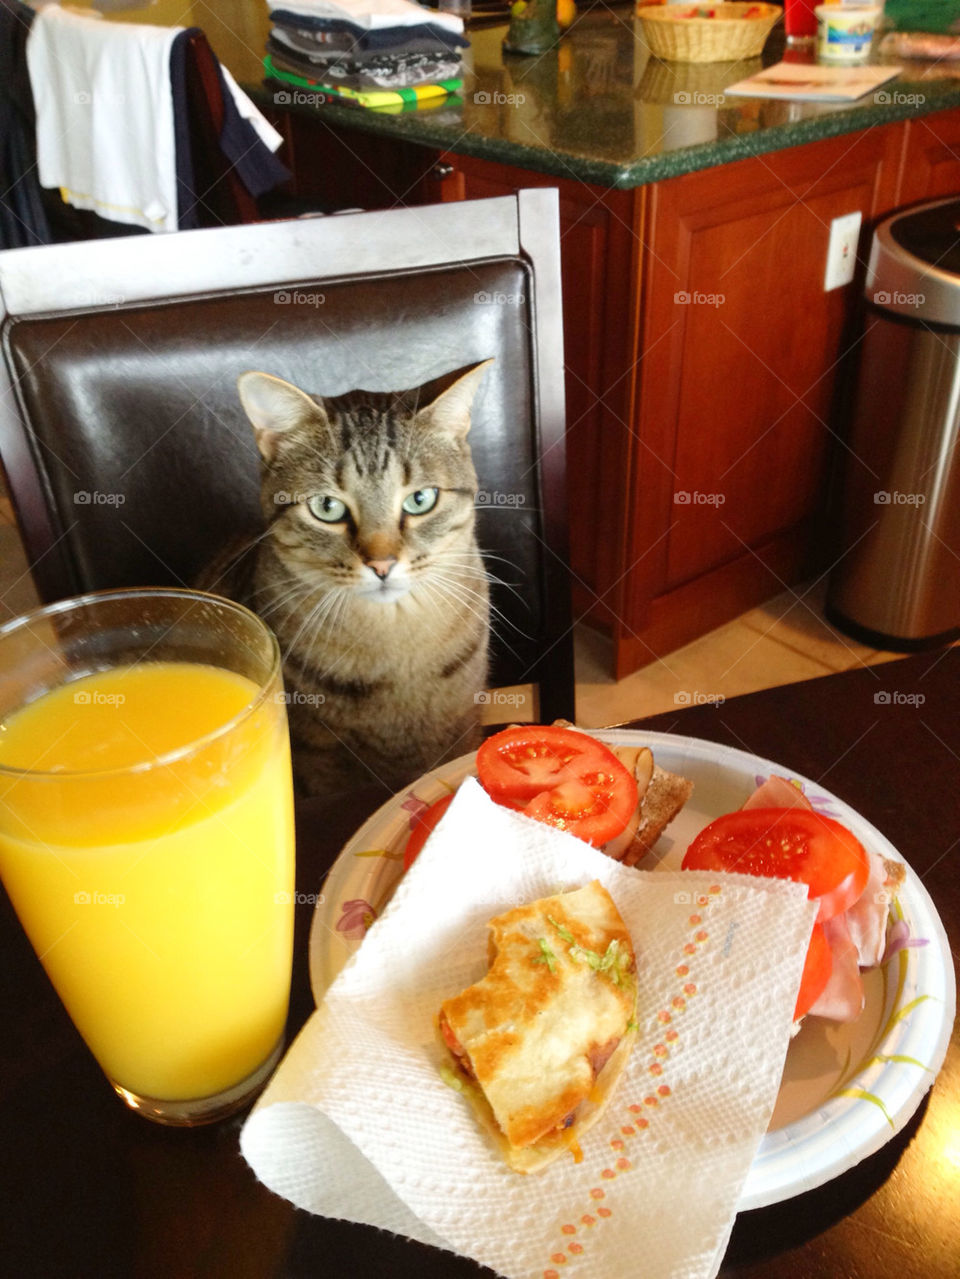 Cat wanting to eat my breakfast